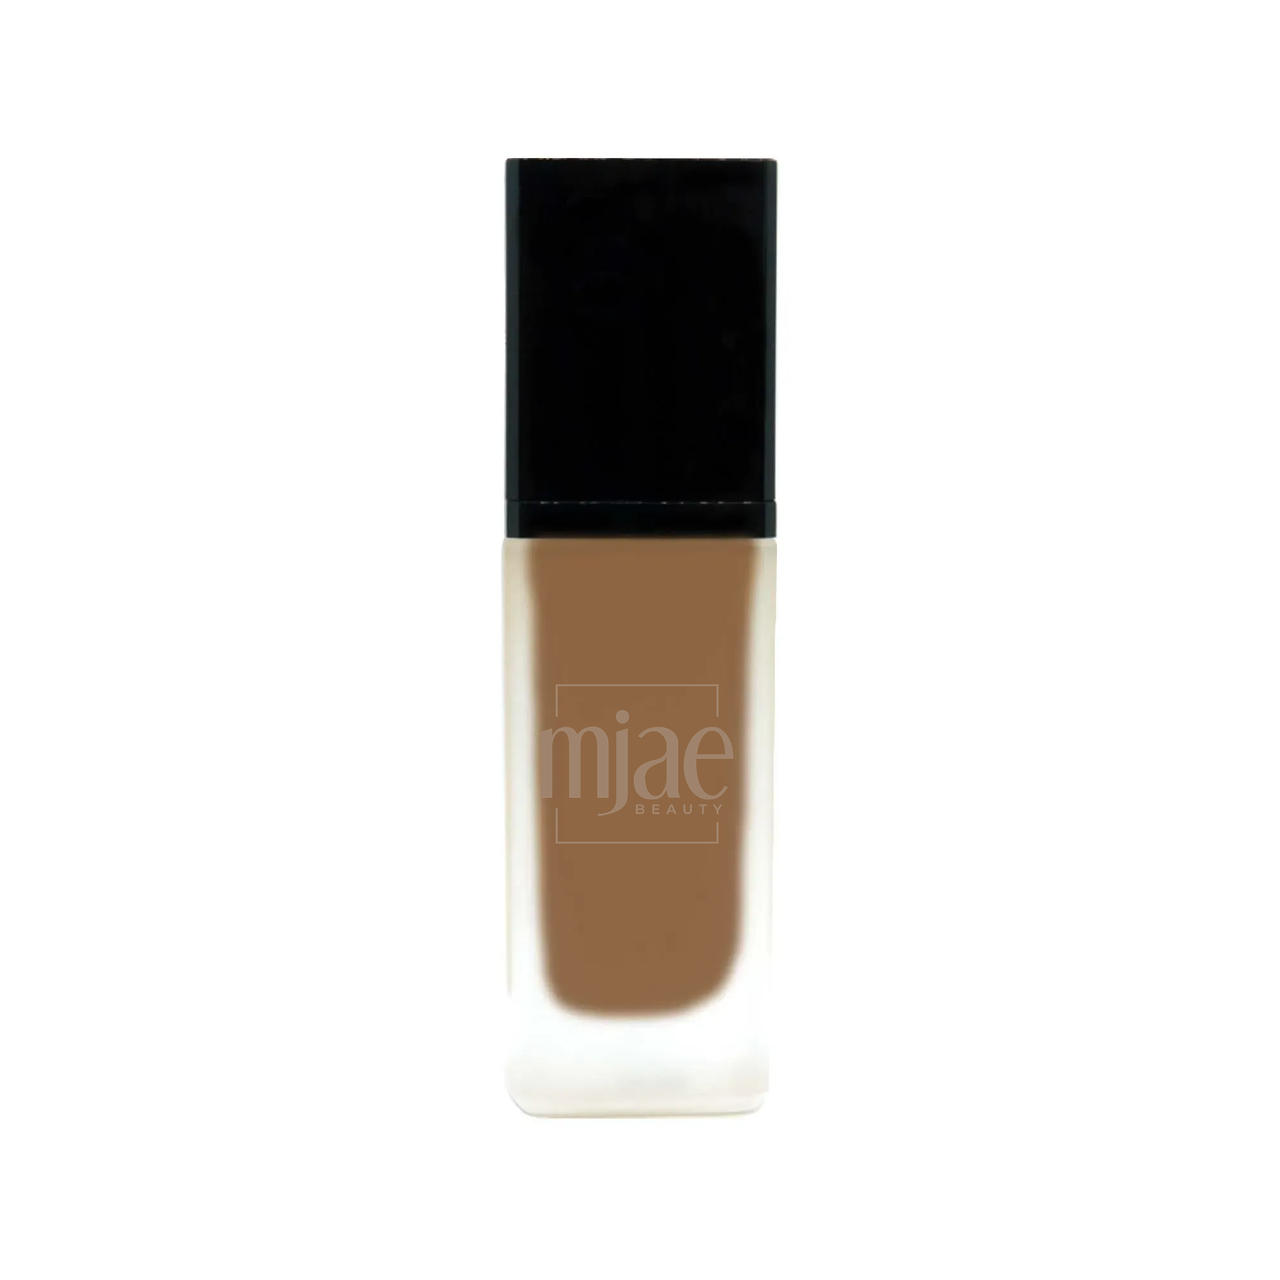 Mjae Foundation with SPF - Brunette - Clean Beauty